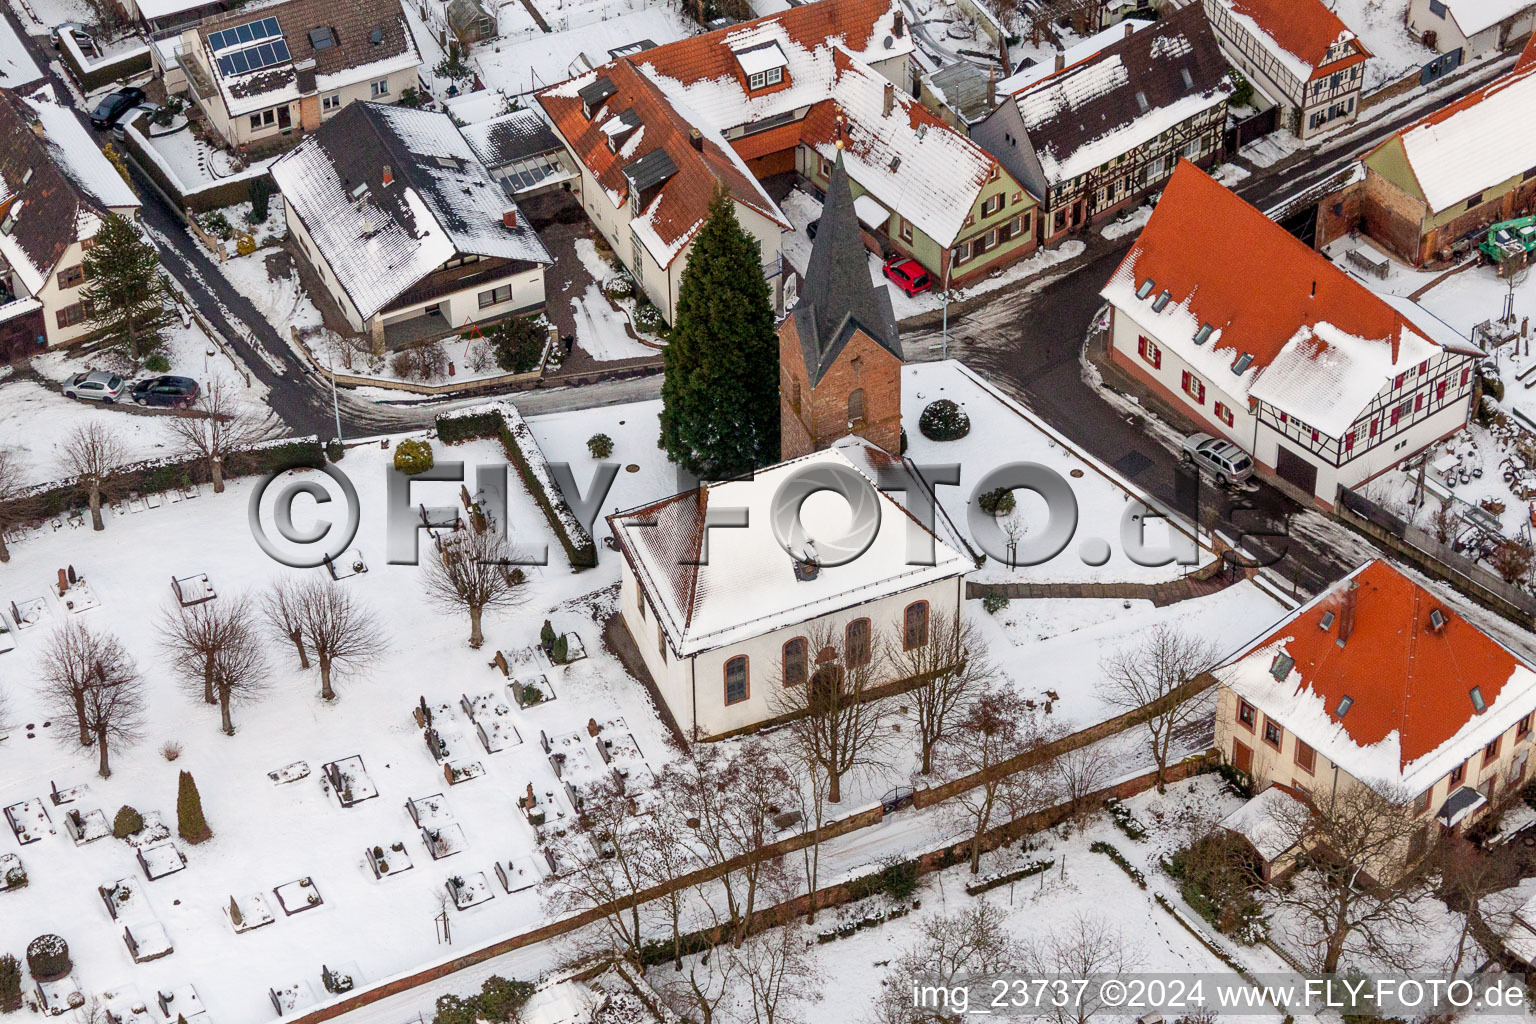 Wintry snowy Church building in the village of in Winden in the state Rhineland-Palatinate, Germany